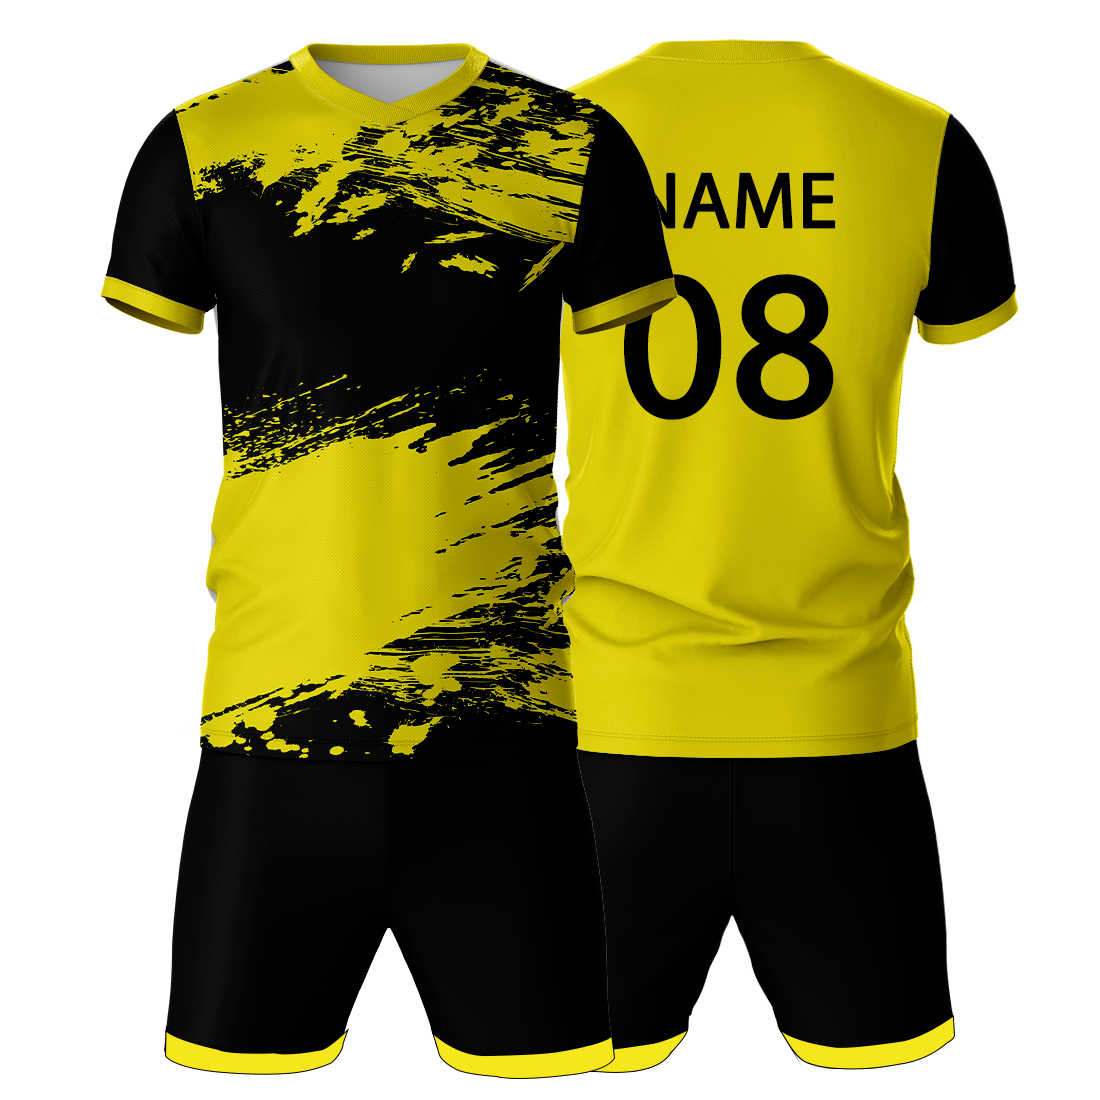 All Over Printed Jersey With Shorts Name & Number Printed.NP50000661